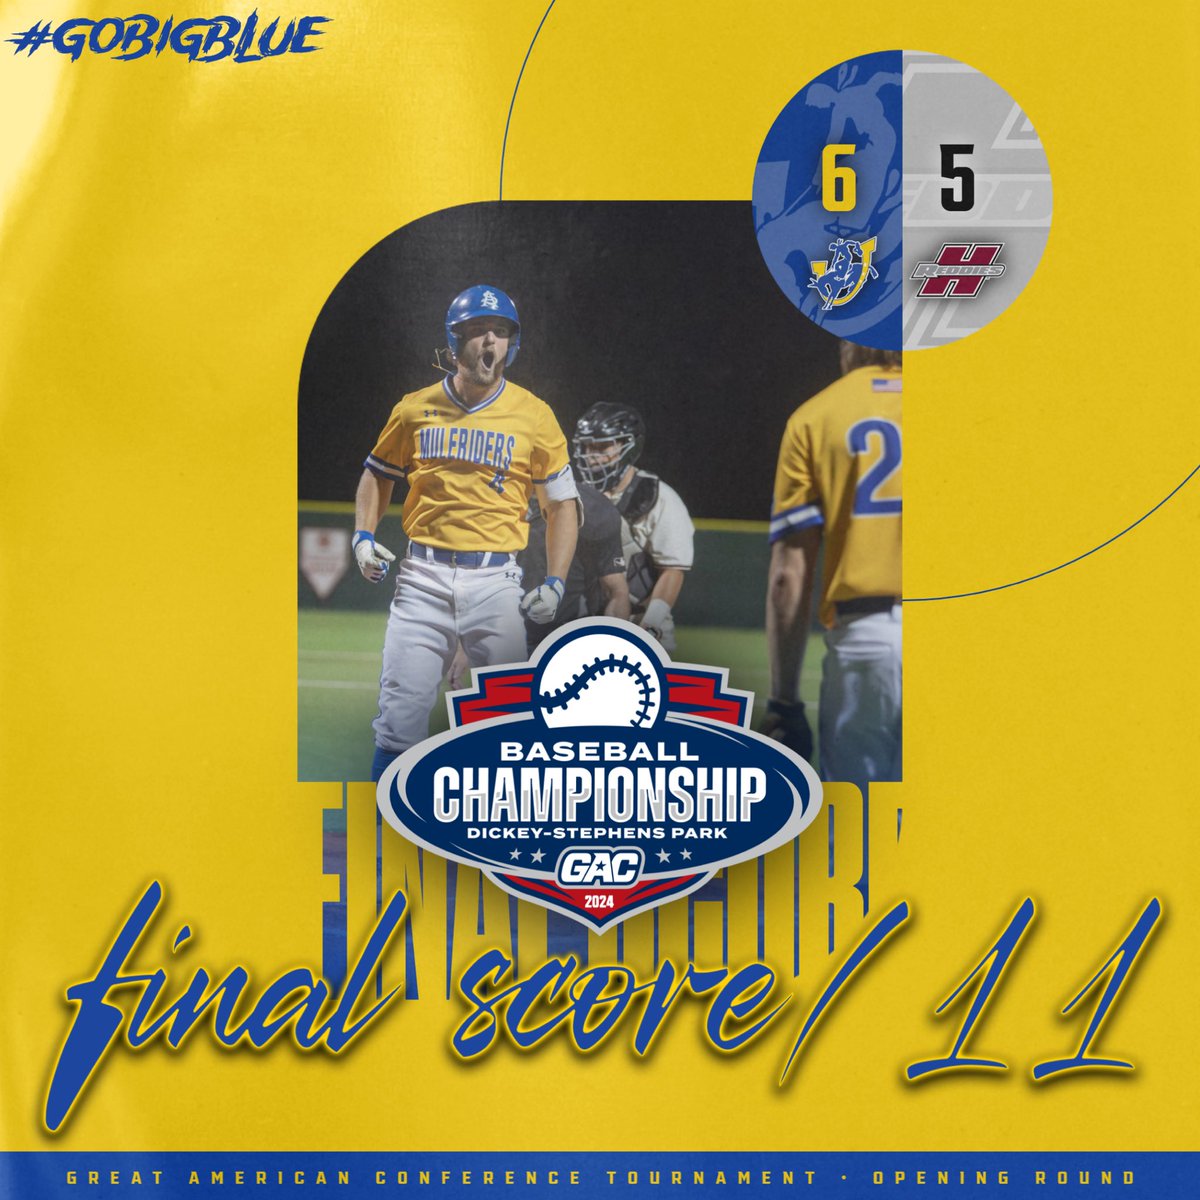 💪⚾️ Needed a couple more frames, but got the first☝️

Richardson’s 11th inning blast the difference in the Muleriders’ 6-5 #theGAC tournament-opening win over Henderson State‼️ The 2 clubs decide on North Little Rock in a 1 PM DH on Saturday😤

#GoMuleriders #LetsRide #GoBigBlue